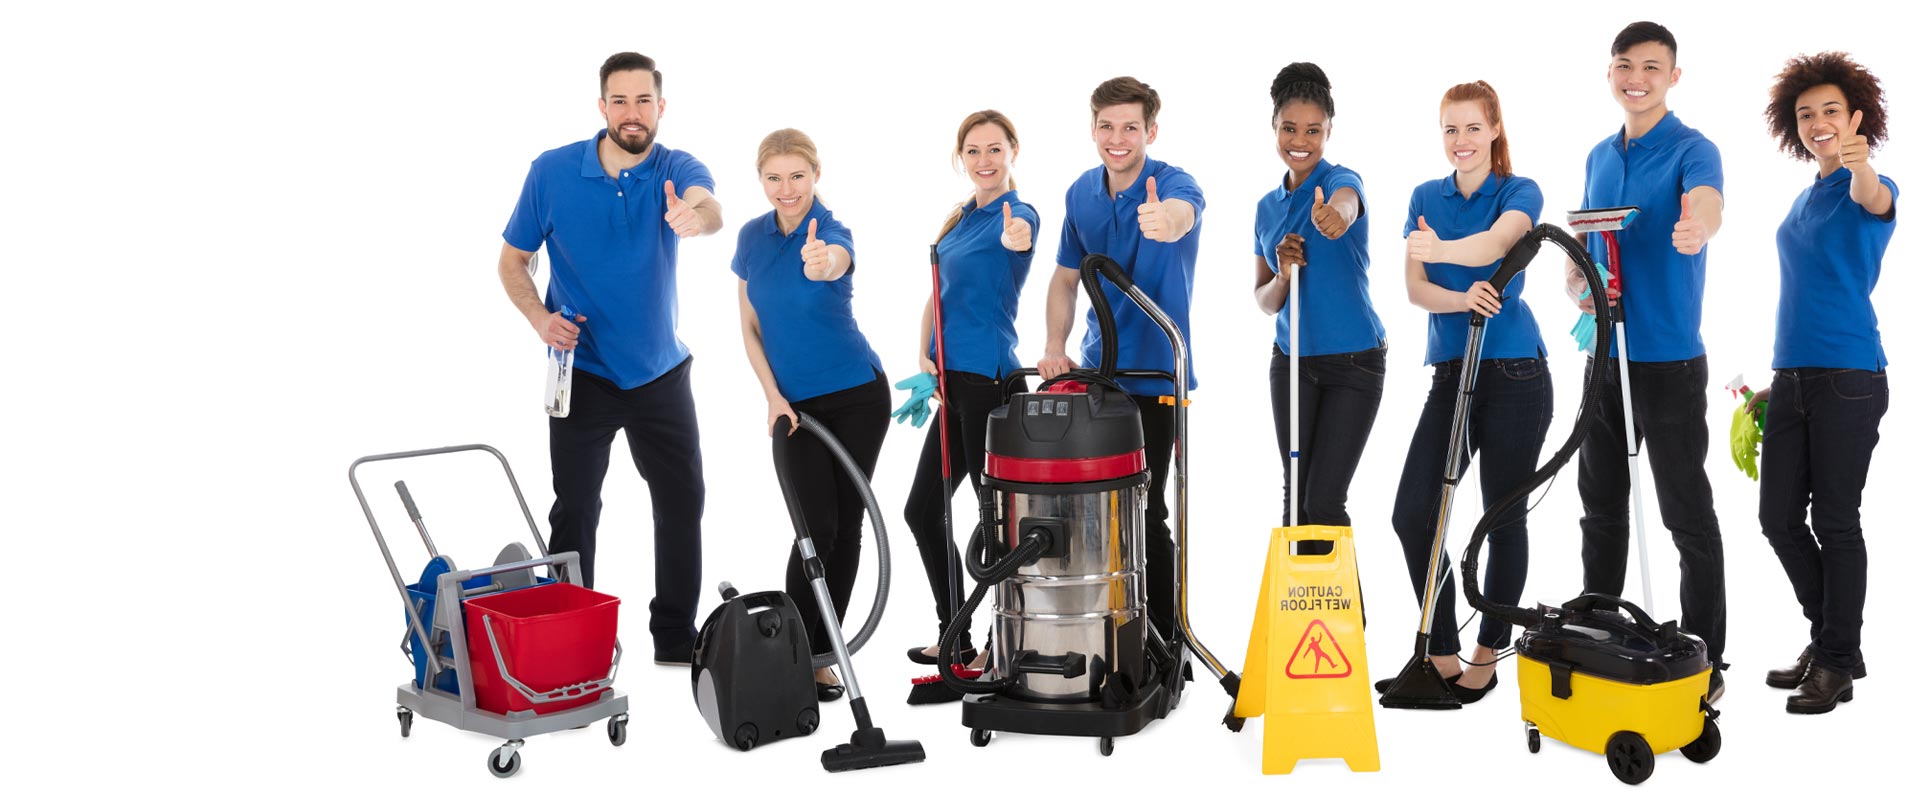 The B&J Cleaning team of cleaners.